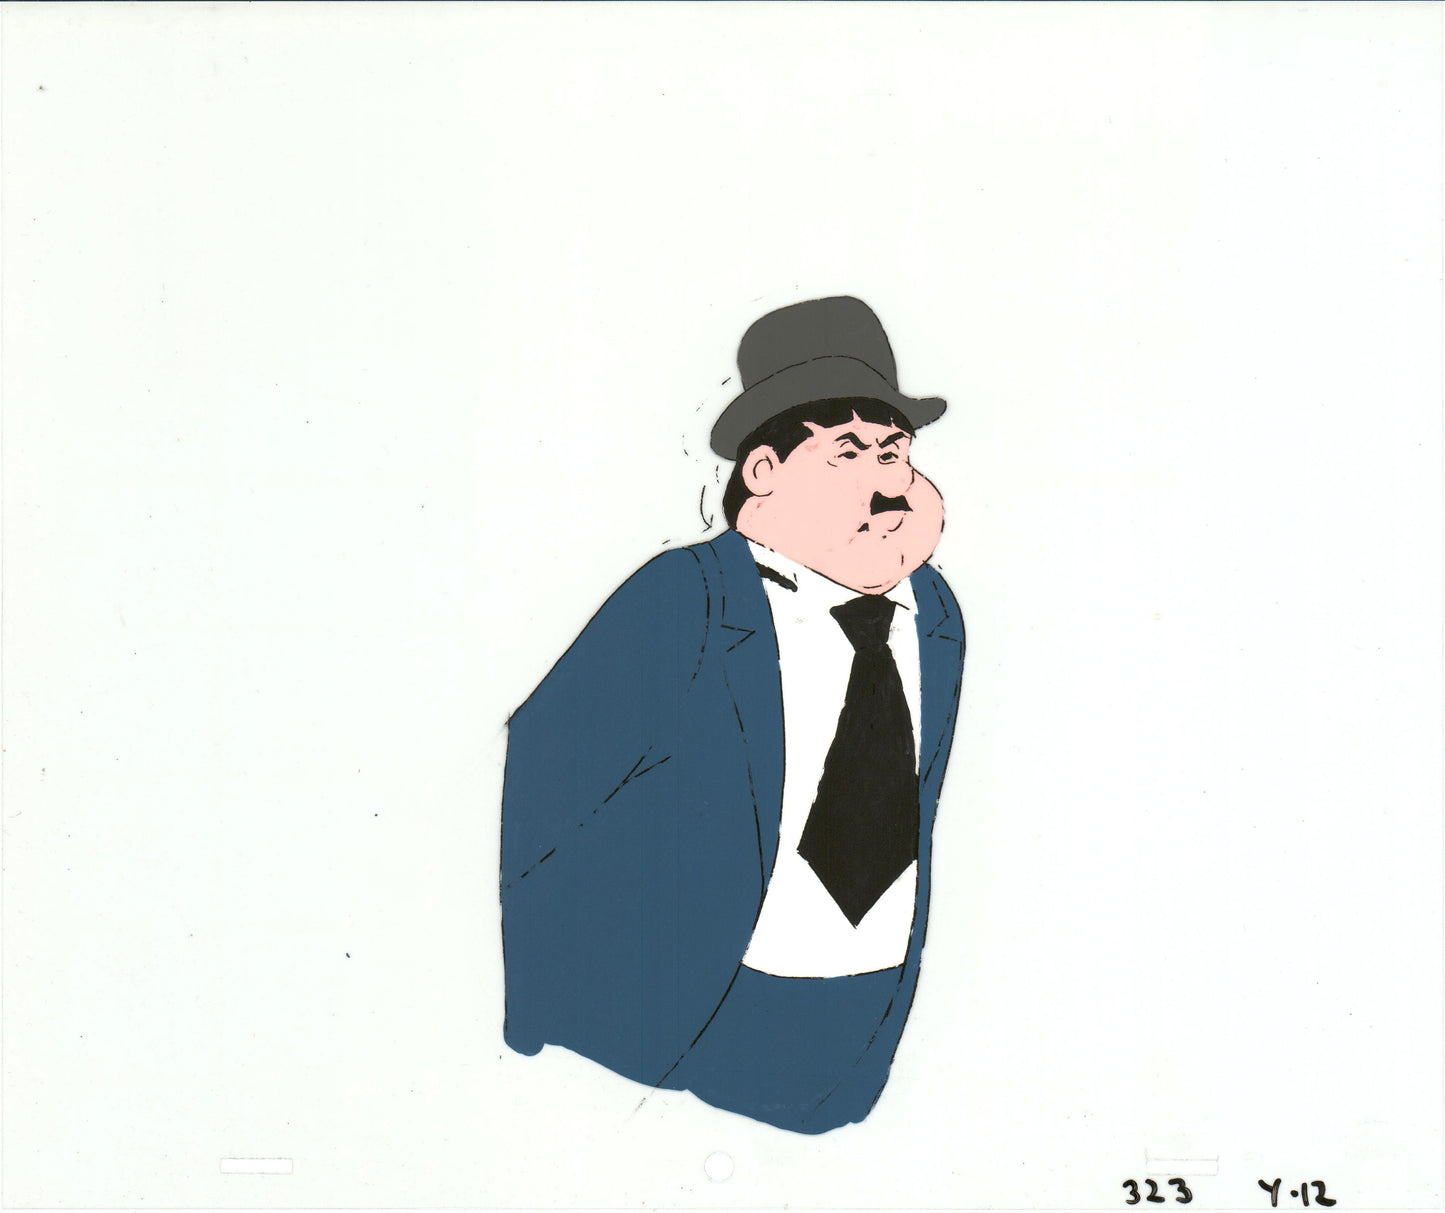 SCOOBY DOO 1972 Oliver Hardy Production Animation Cel from Hanna Barbera 274